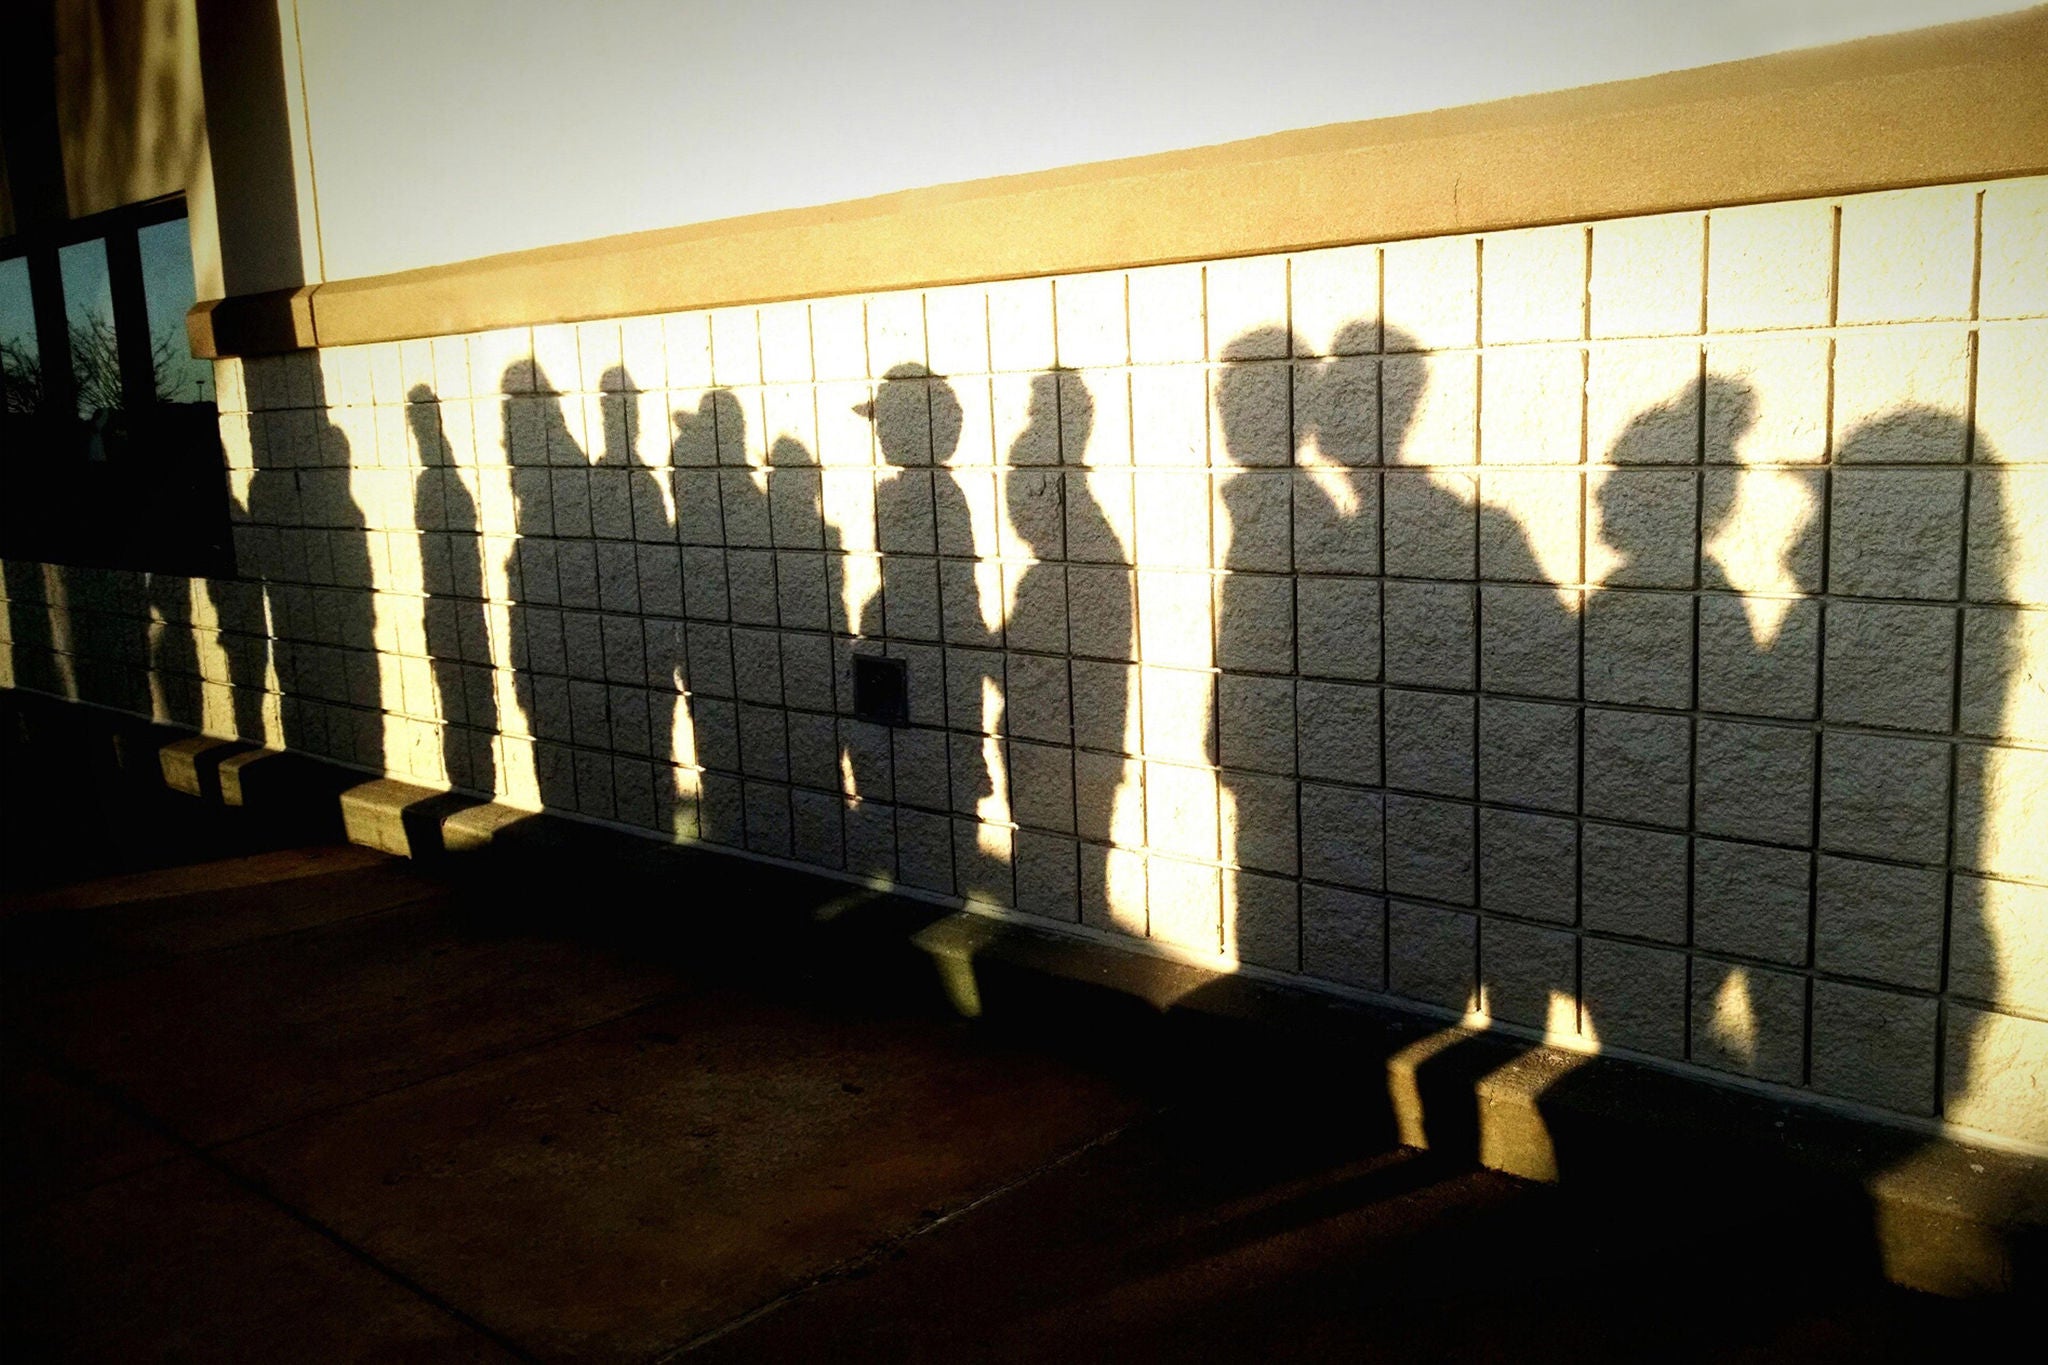 Shadow of men and women standing in queue on wall.